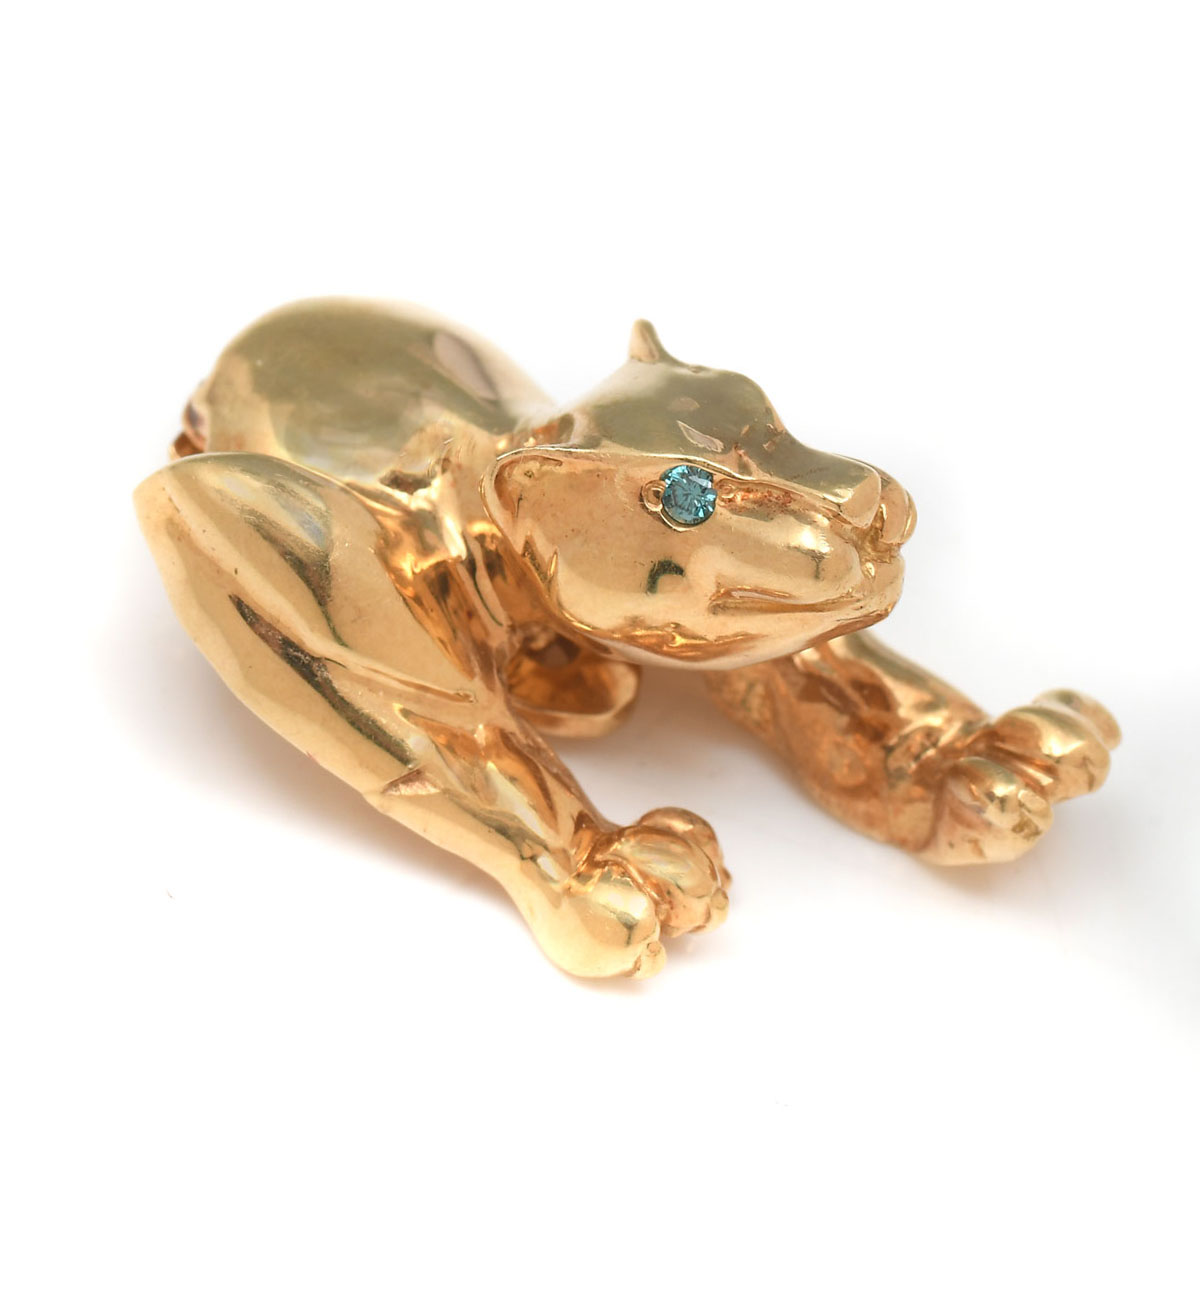 18K SIGNED PROWLING PANTHER PENDANT: